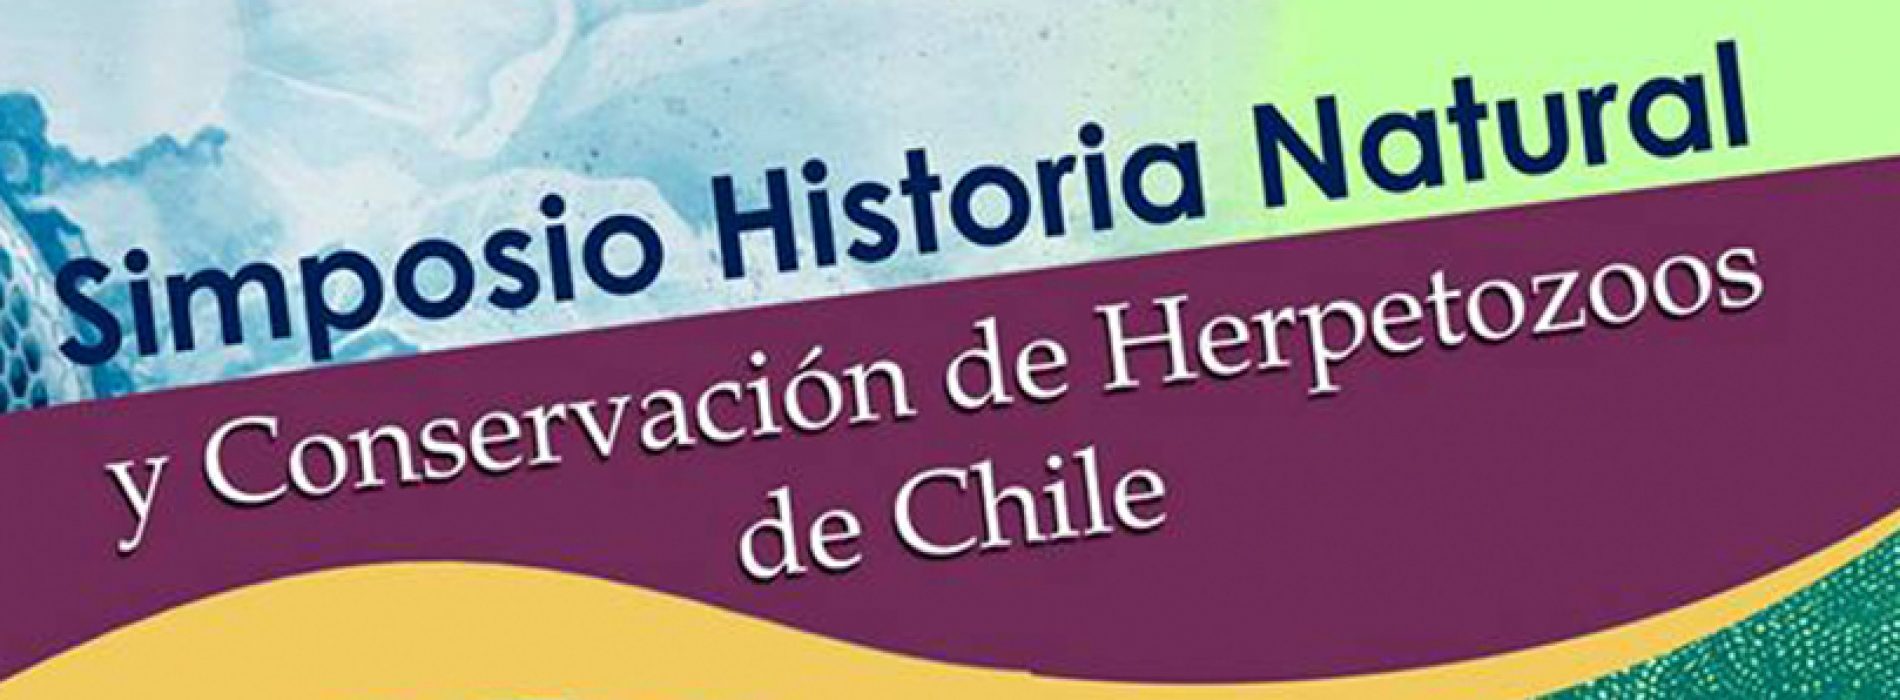 Natural history and conservation of Herpetozoos of Chile Symposium